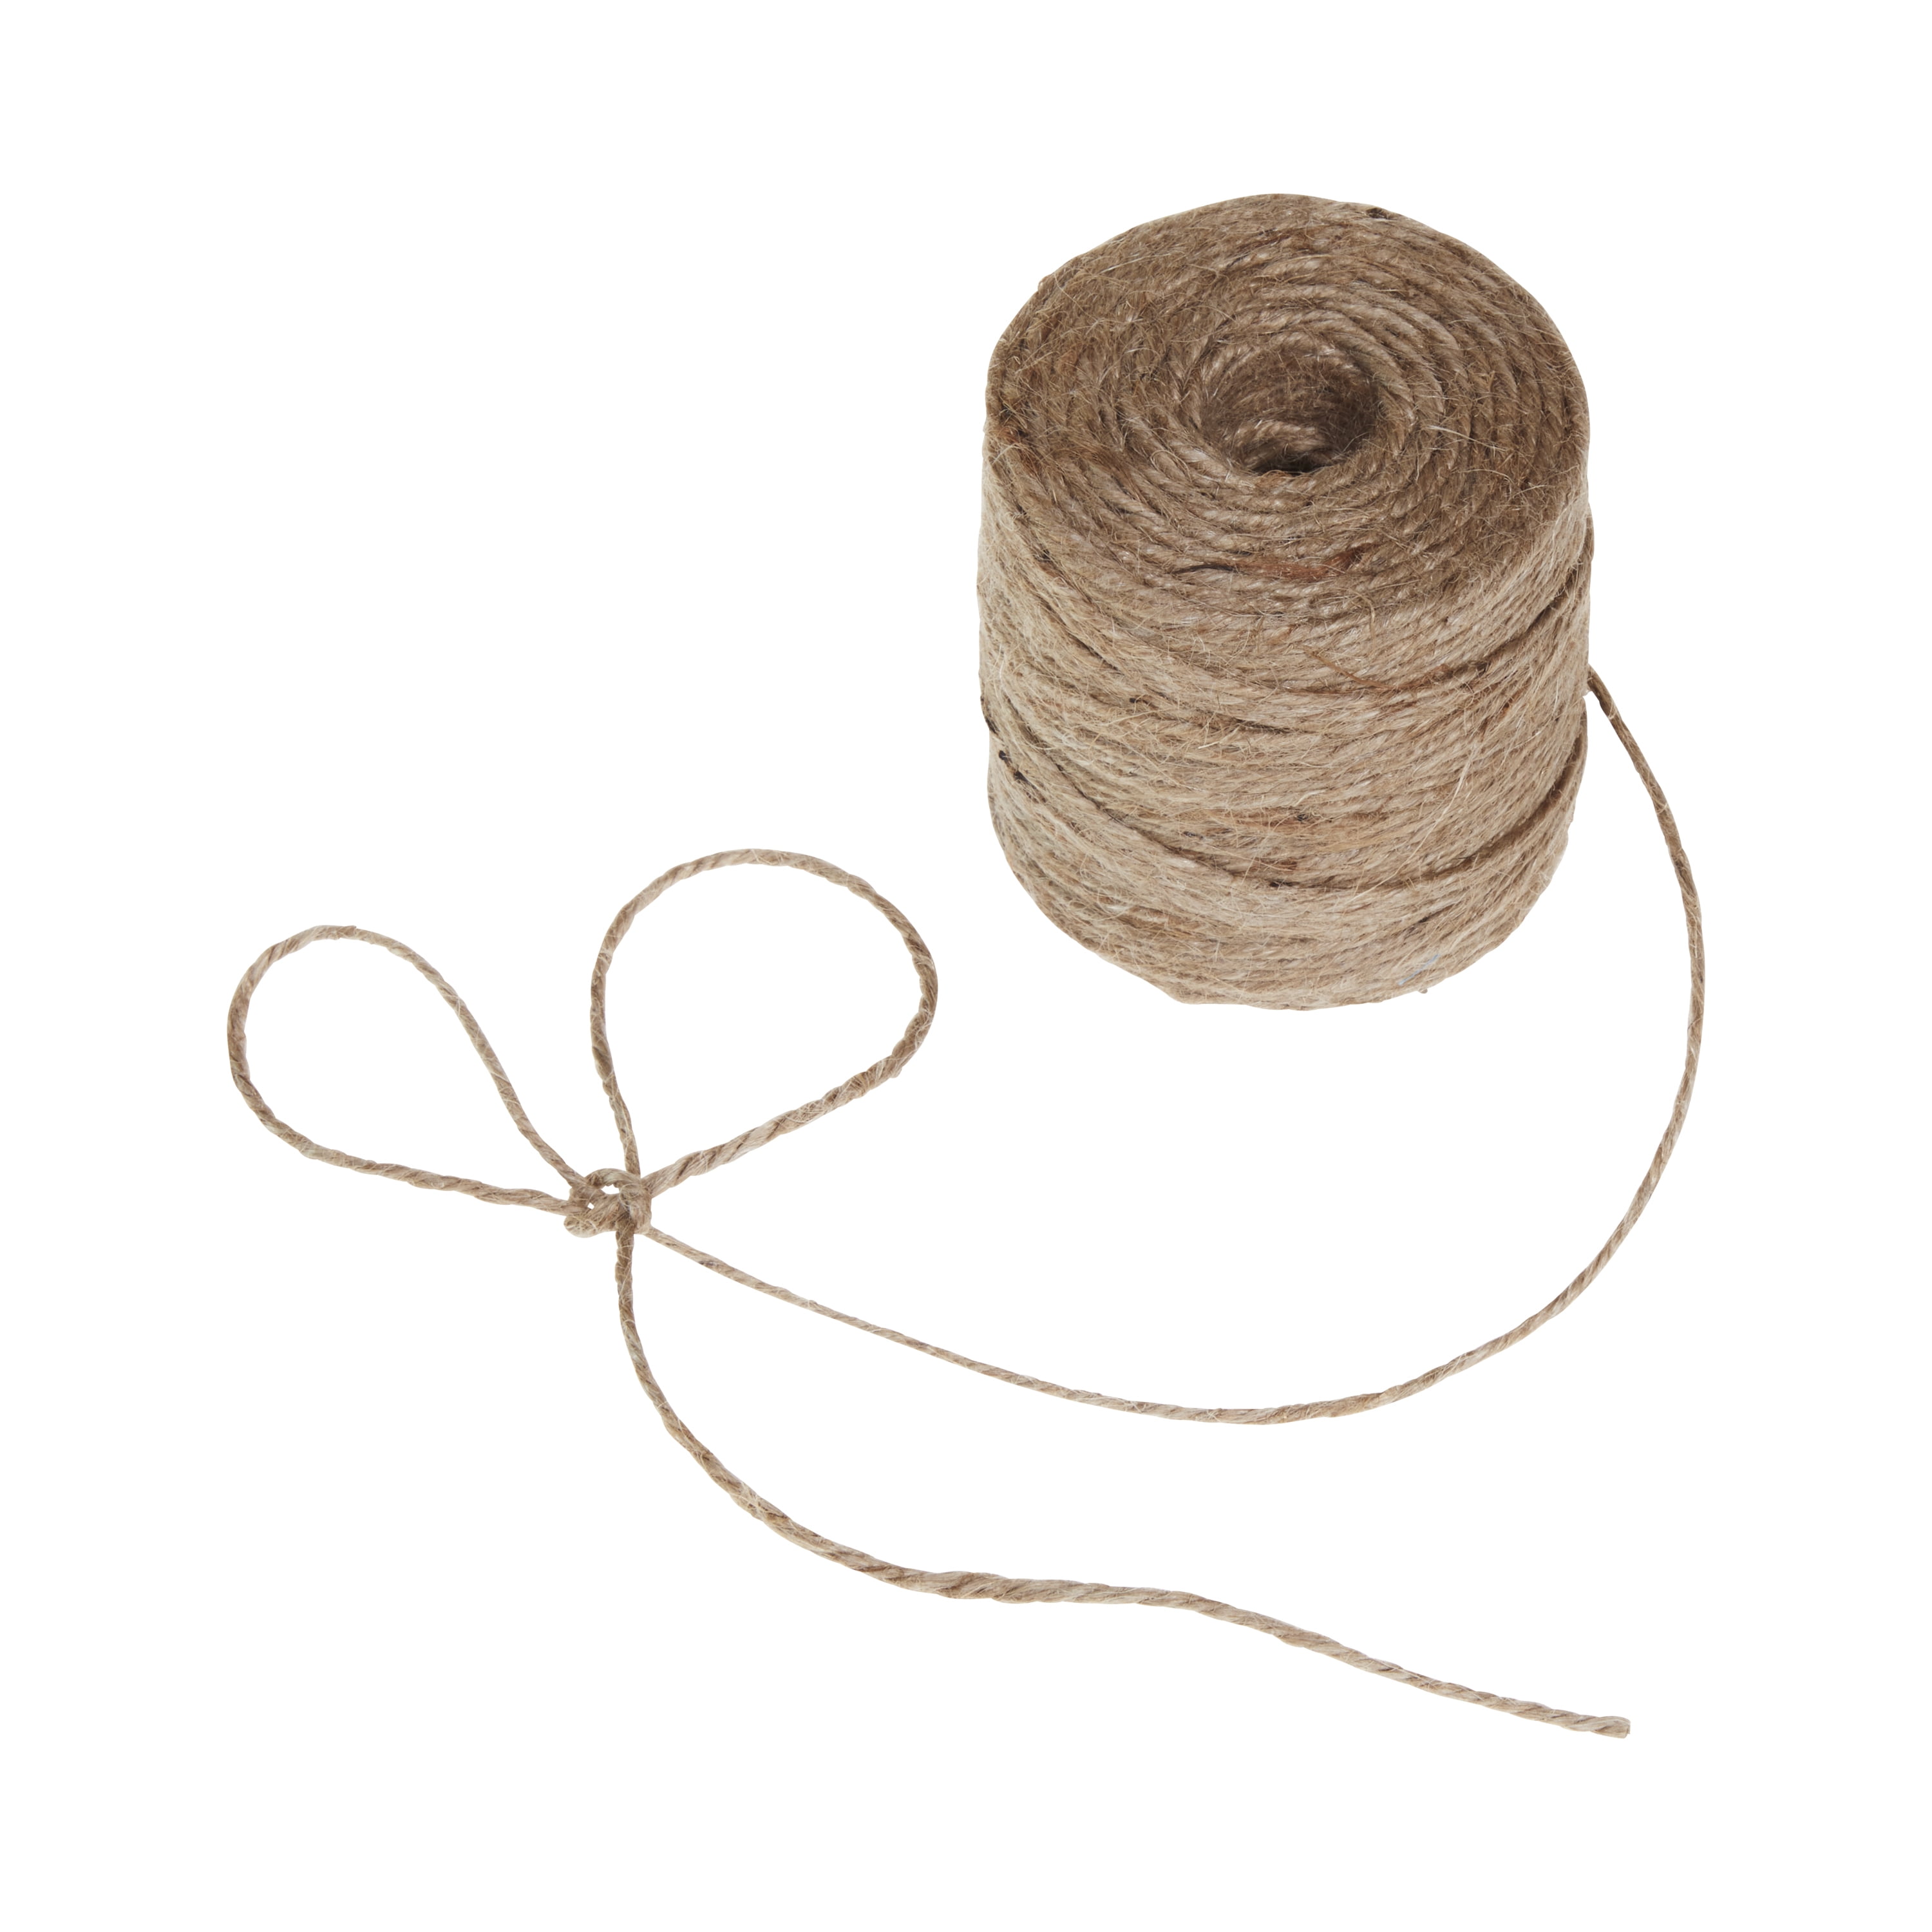 Luster Leaf Rapiclip Garden Tomato Twine 800ft Roll 875 for sale online 